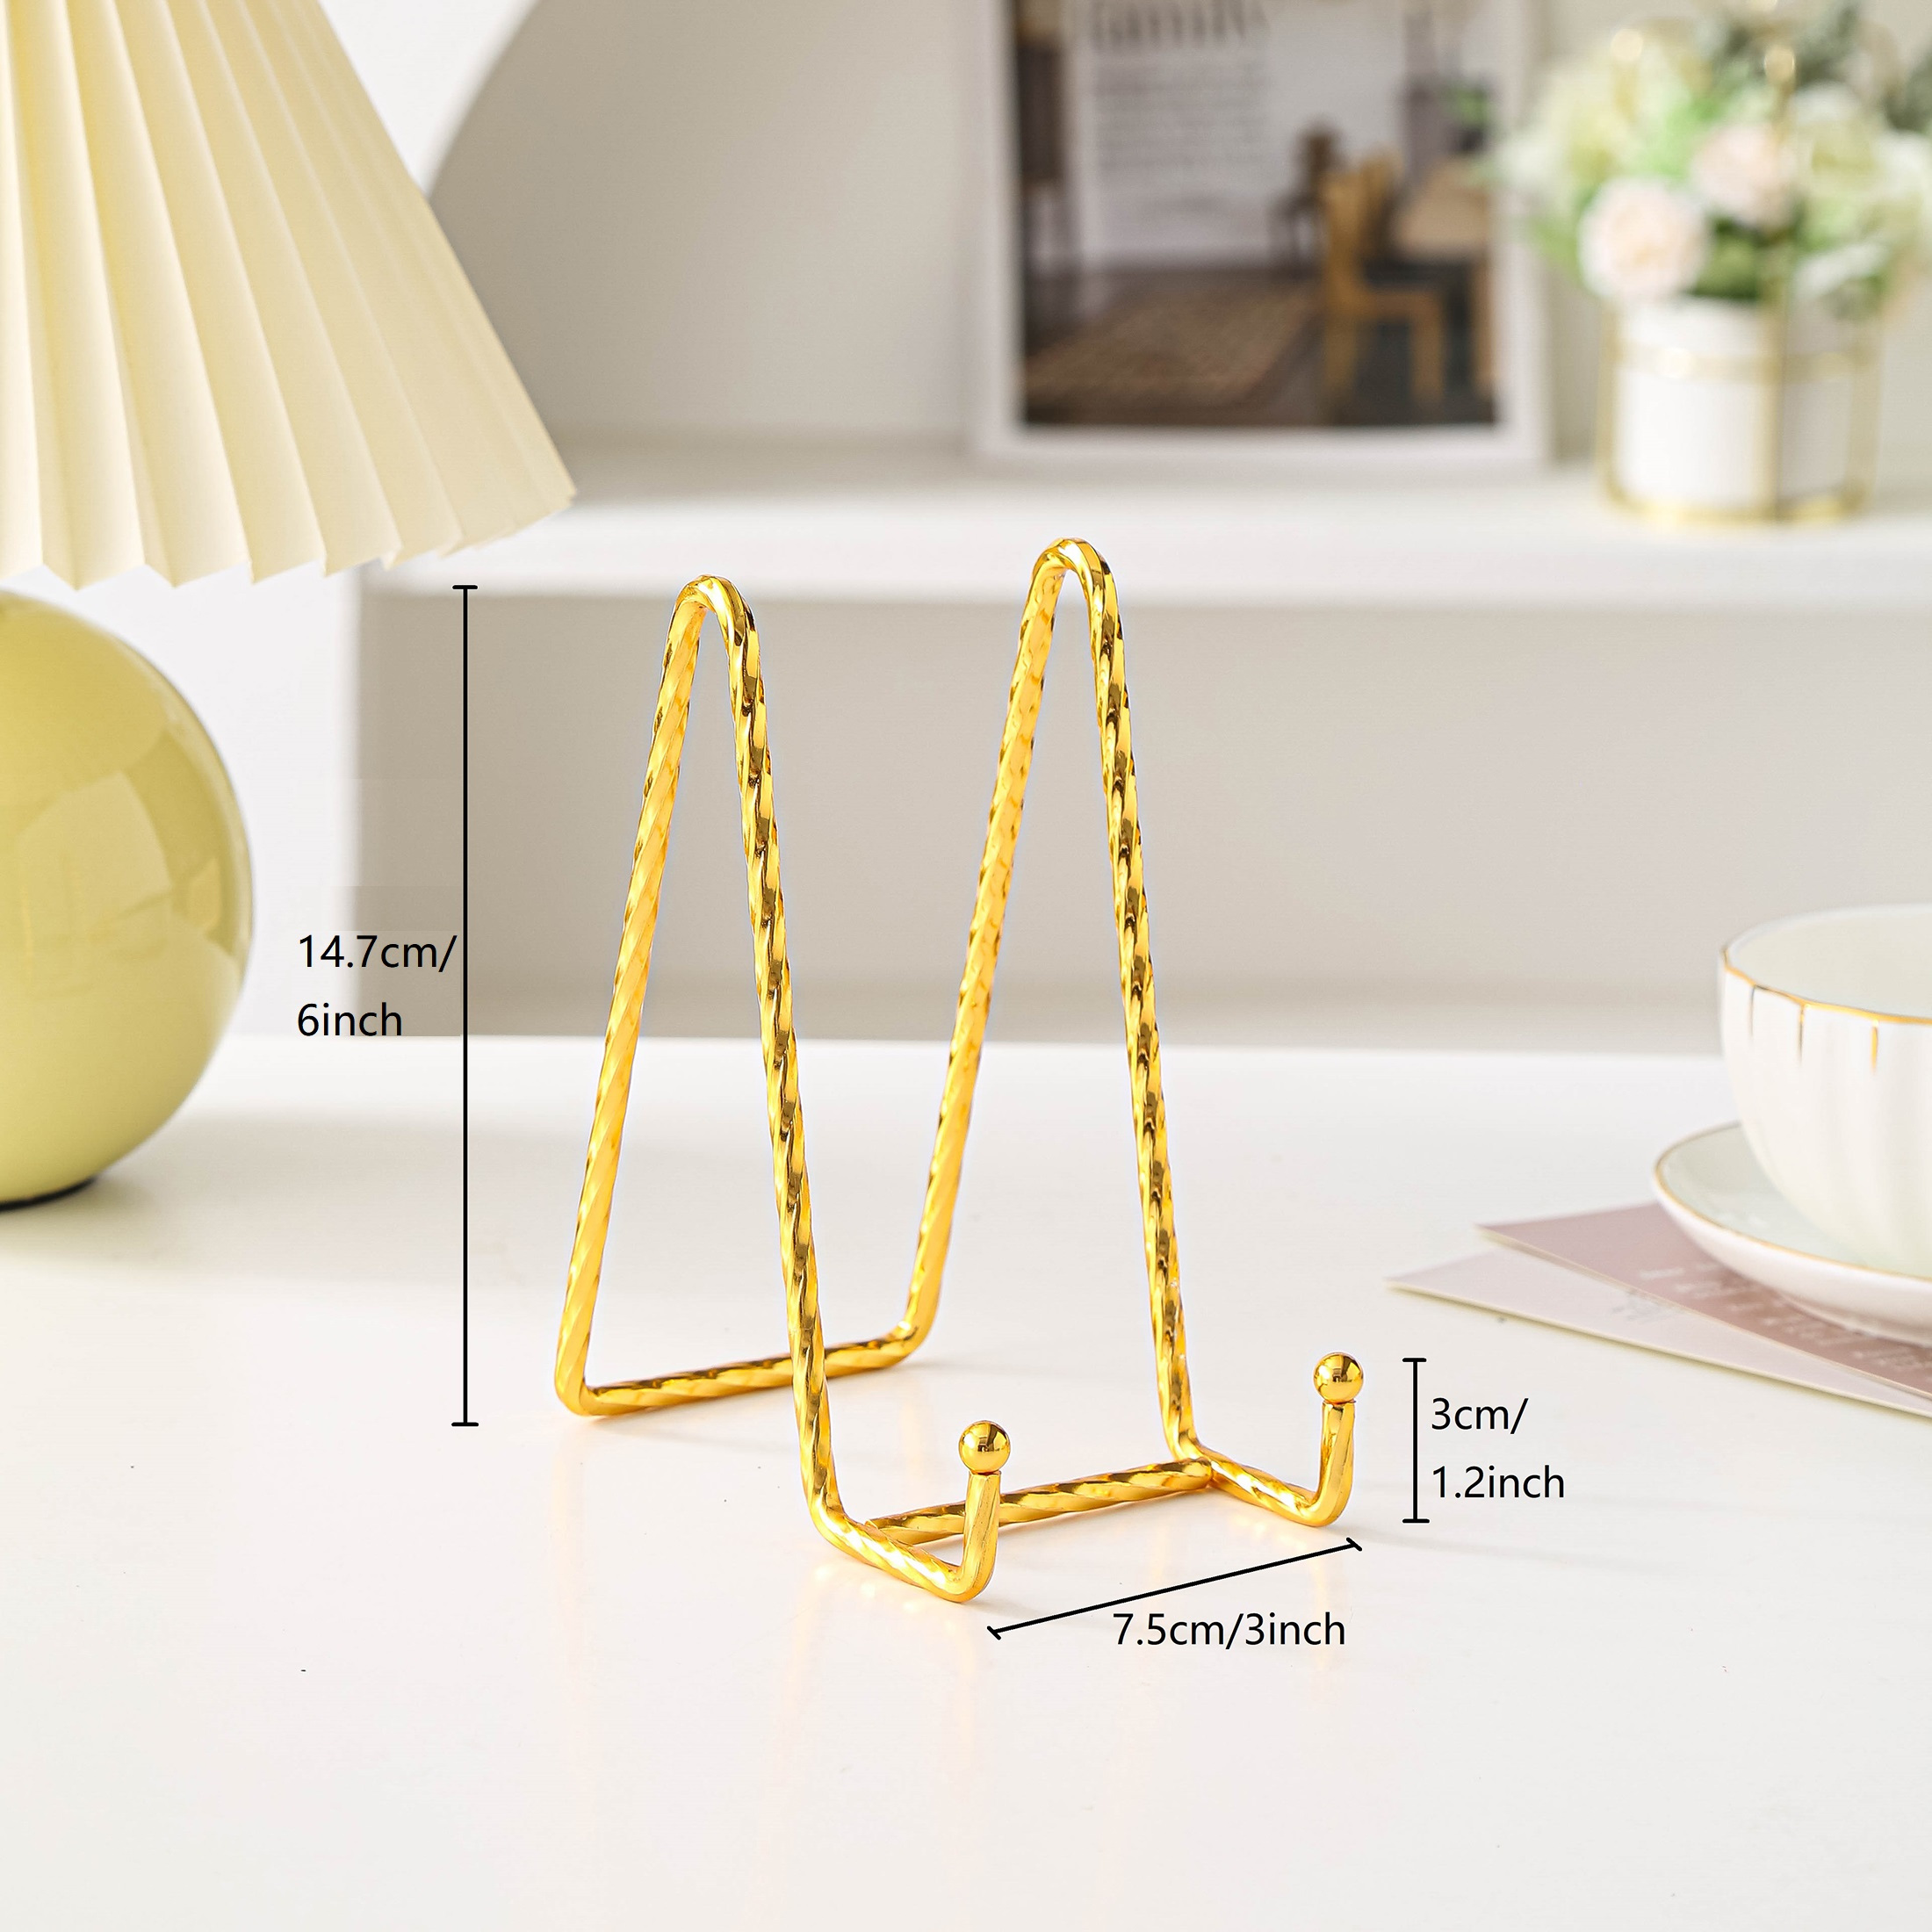 Iron Display Stand Gold Iron Easel Plate Display Photo Holder Stand,  Displays Picture Frames, Cookbooks, Decorative